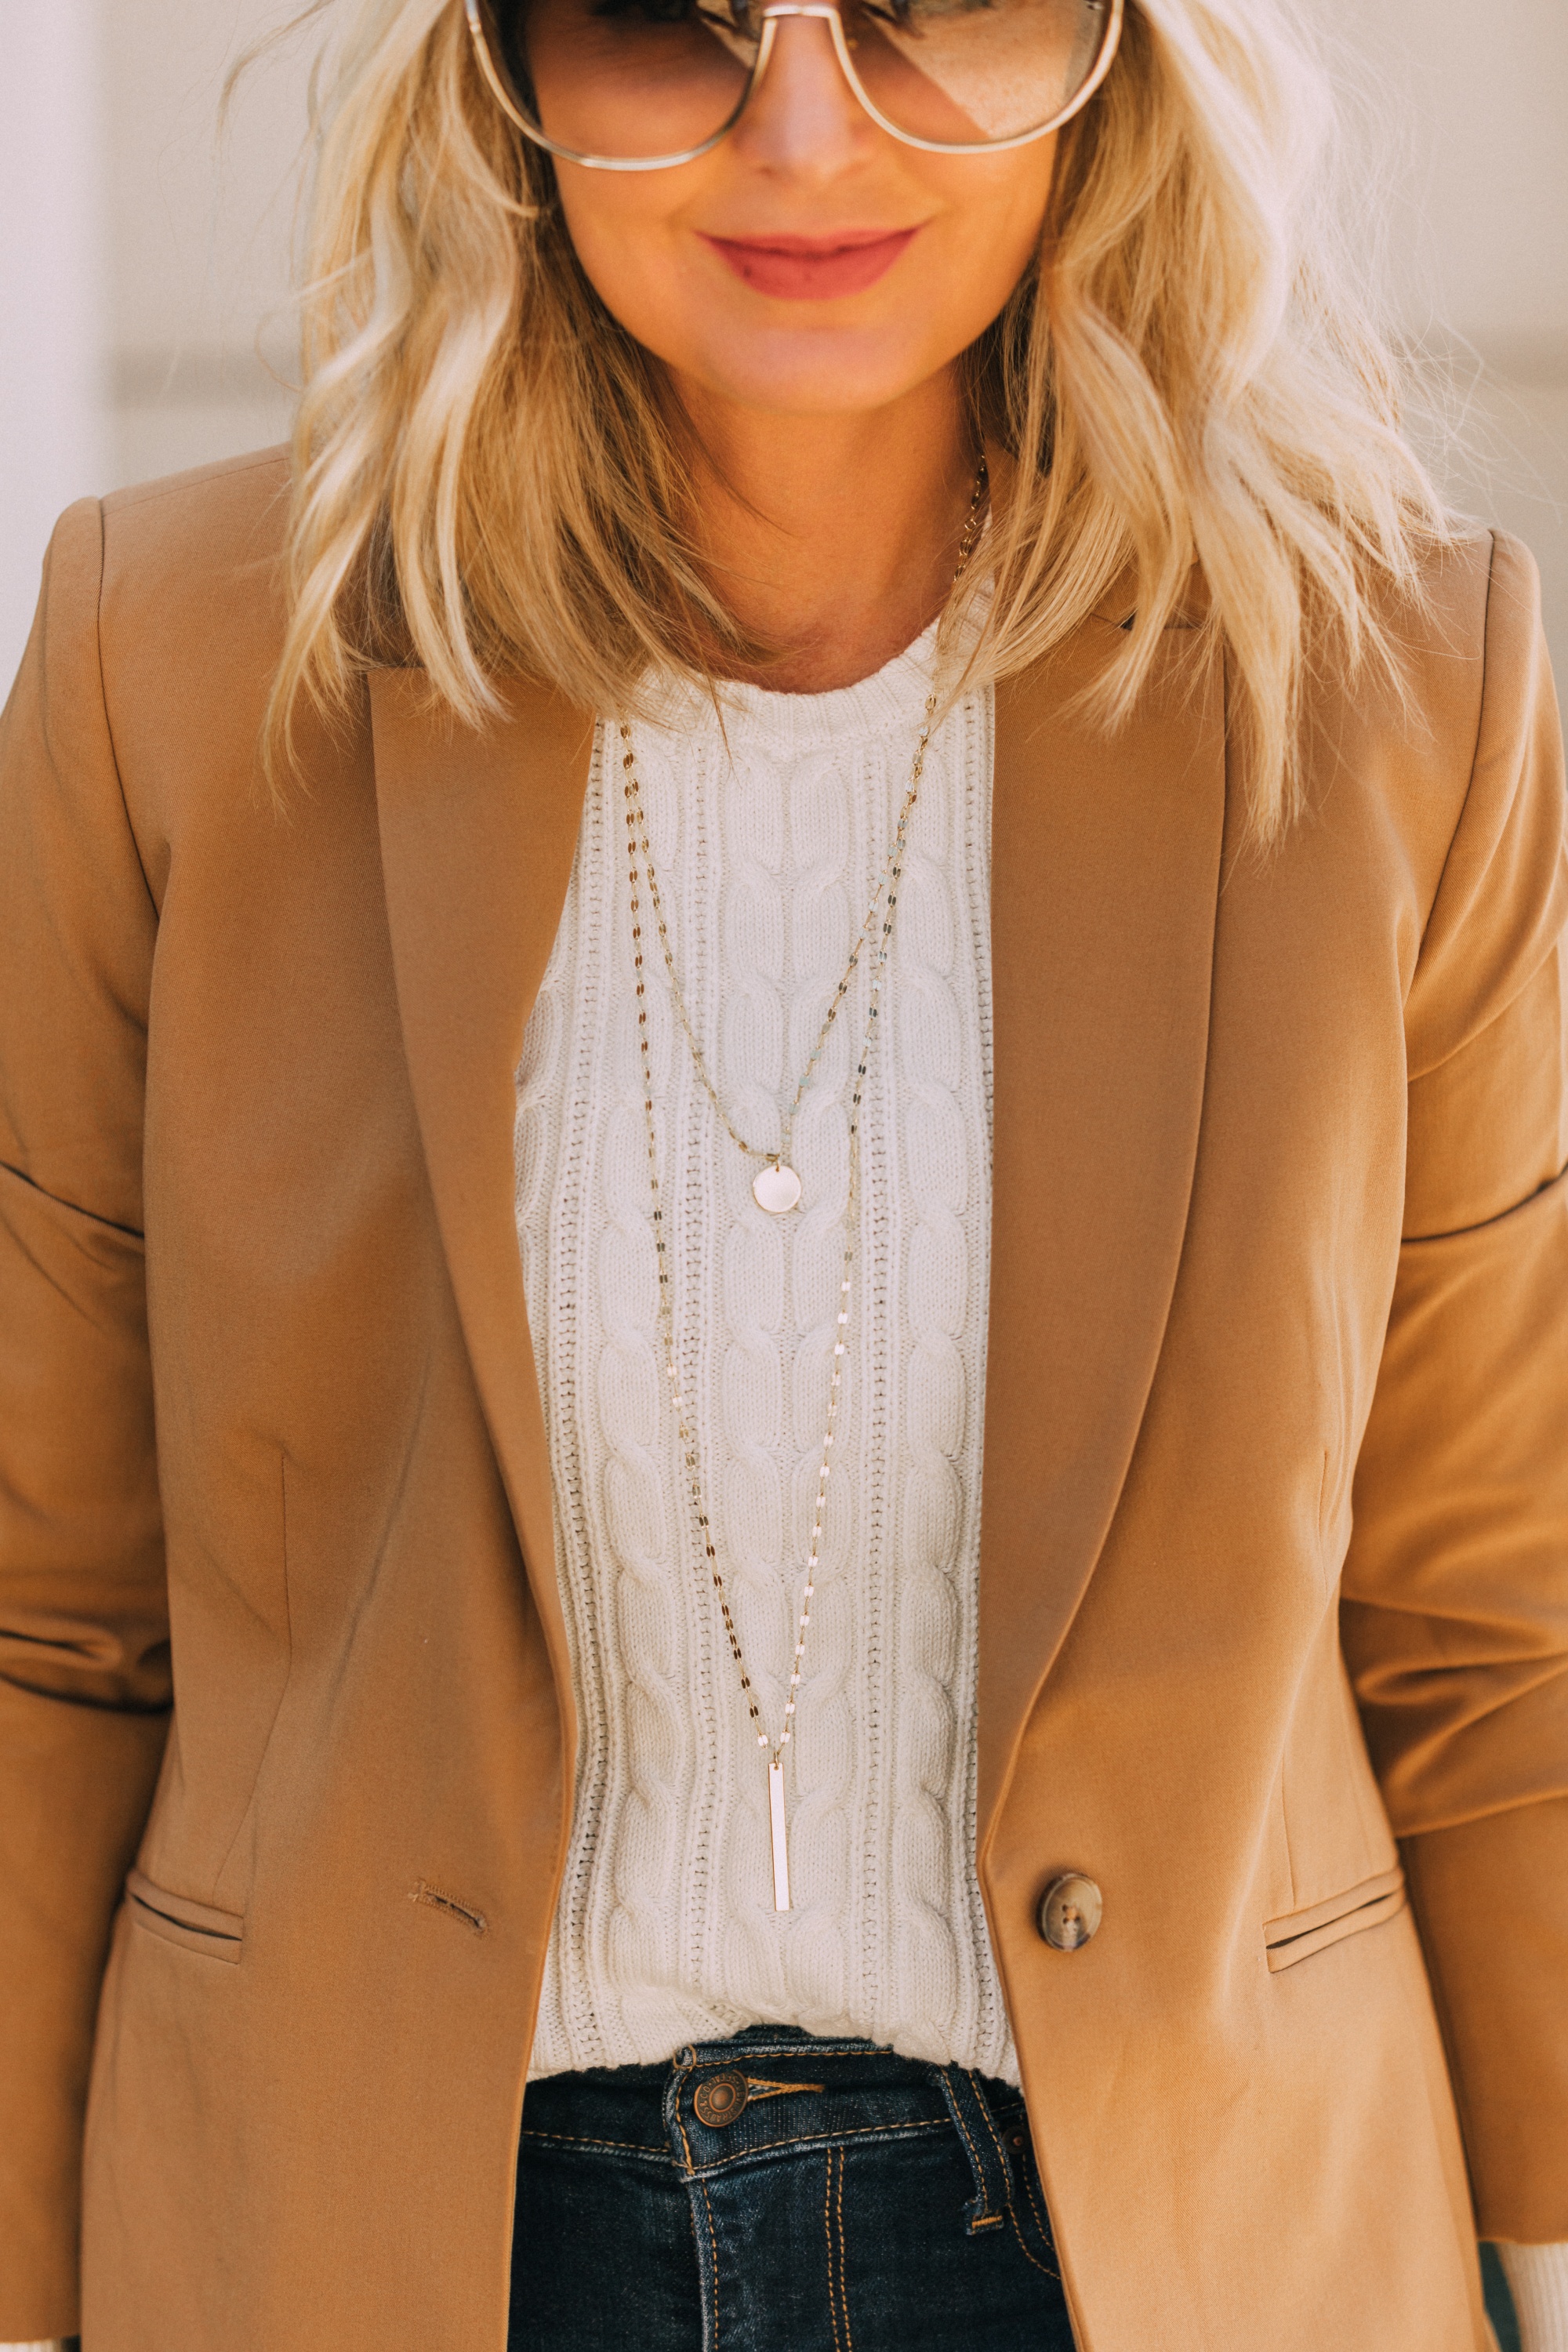 affordable camel colored blazer with levi's blue jeans and white cable knit sweater outfit